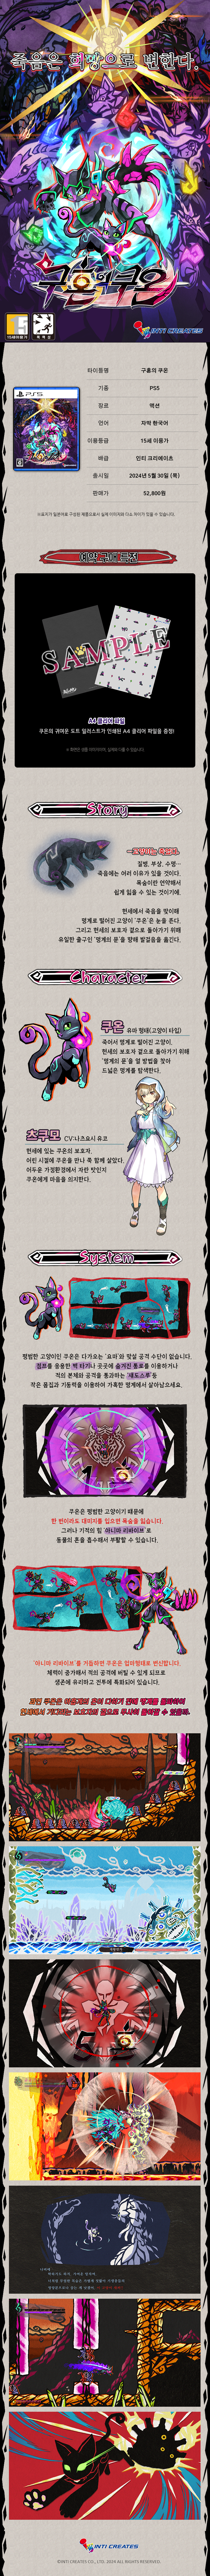 Umbraclaw_kor_web_PS5_일반판.png